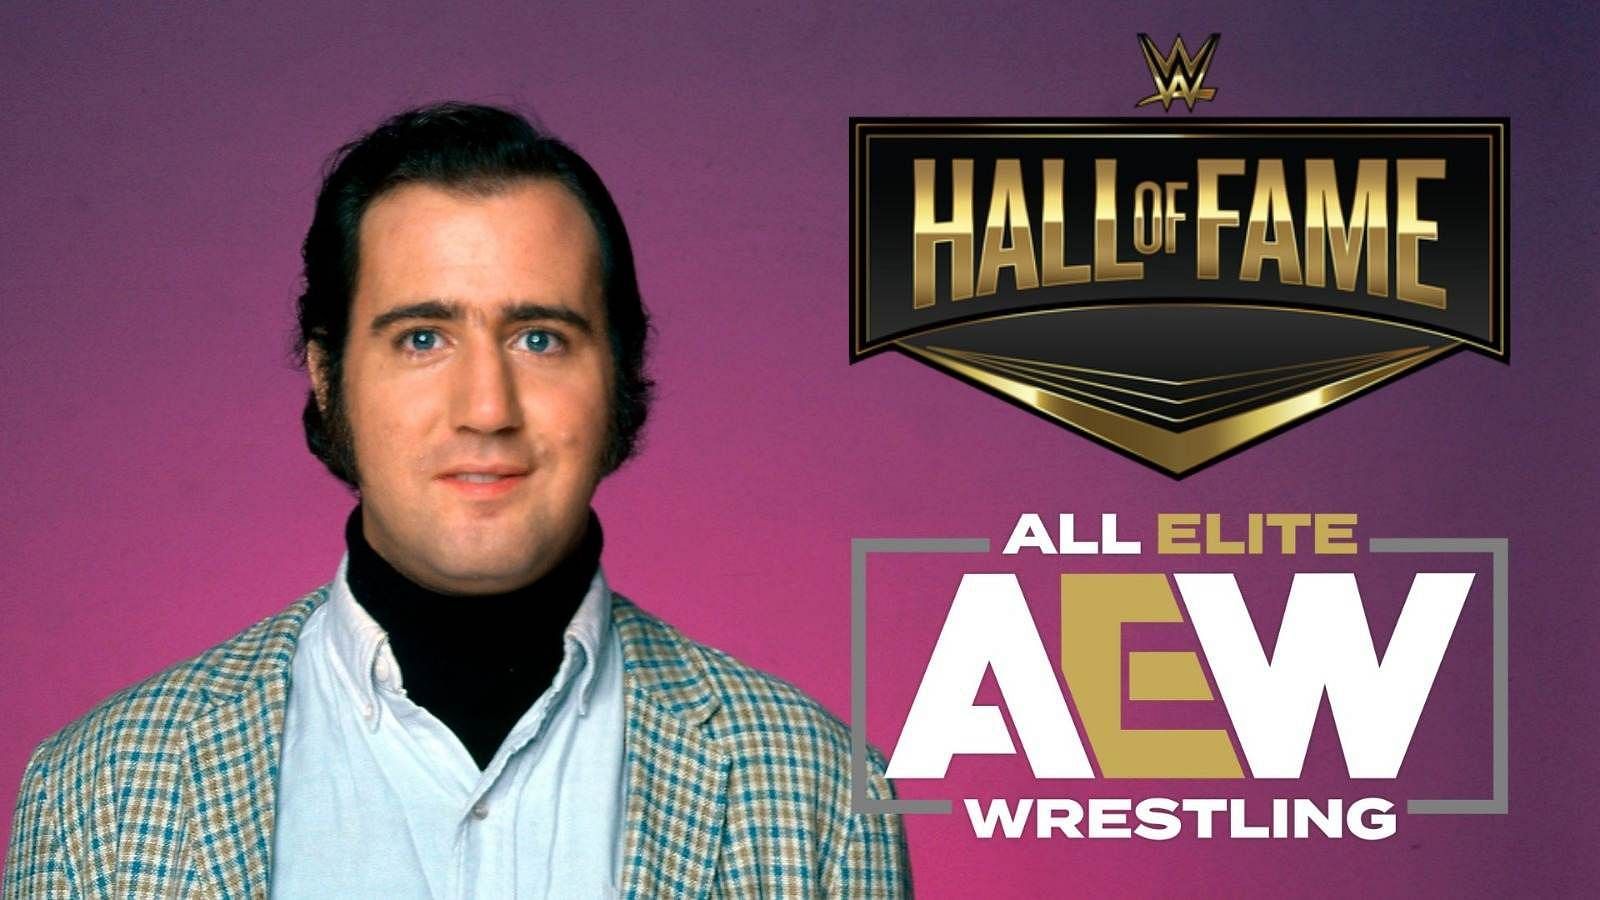 Andy Kaufman wrestled in 1980s